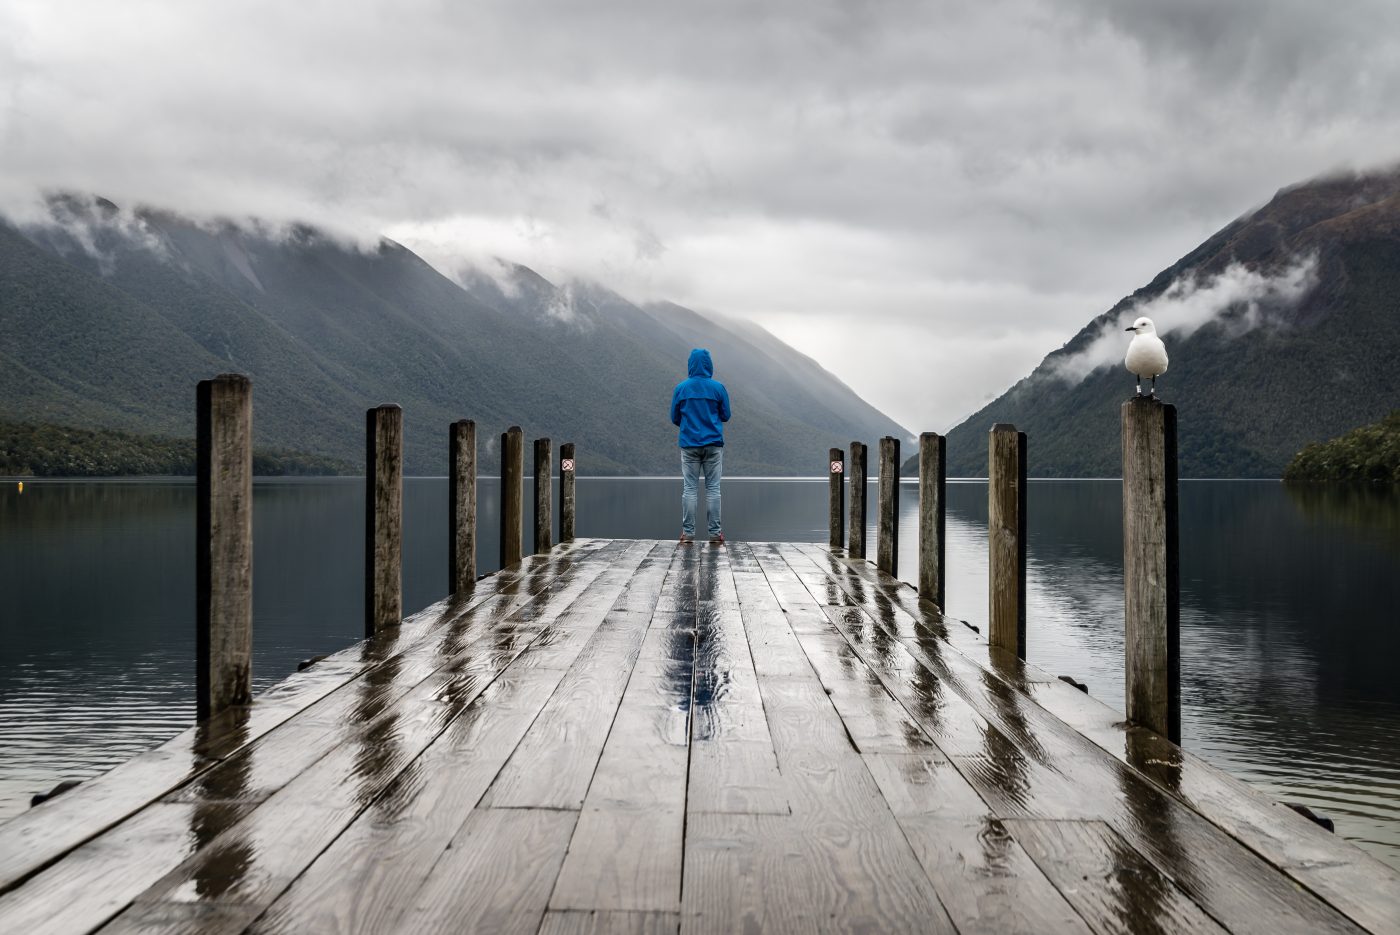 Person stood on a wet wooden pier looking out over a lake